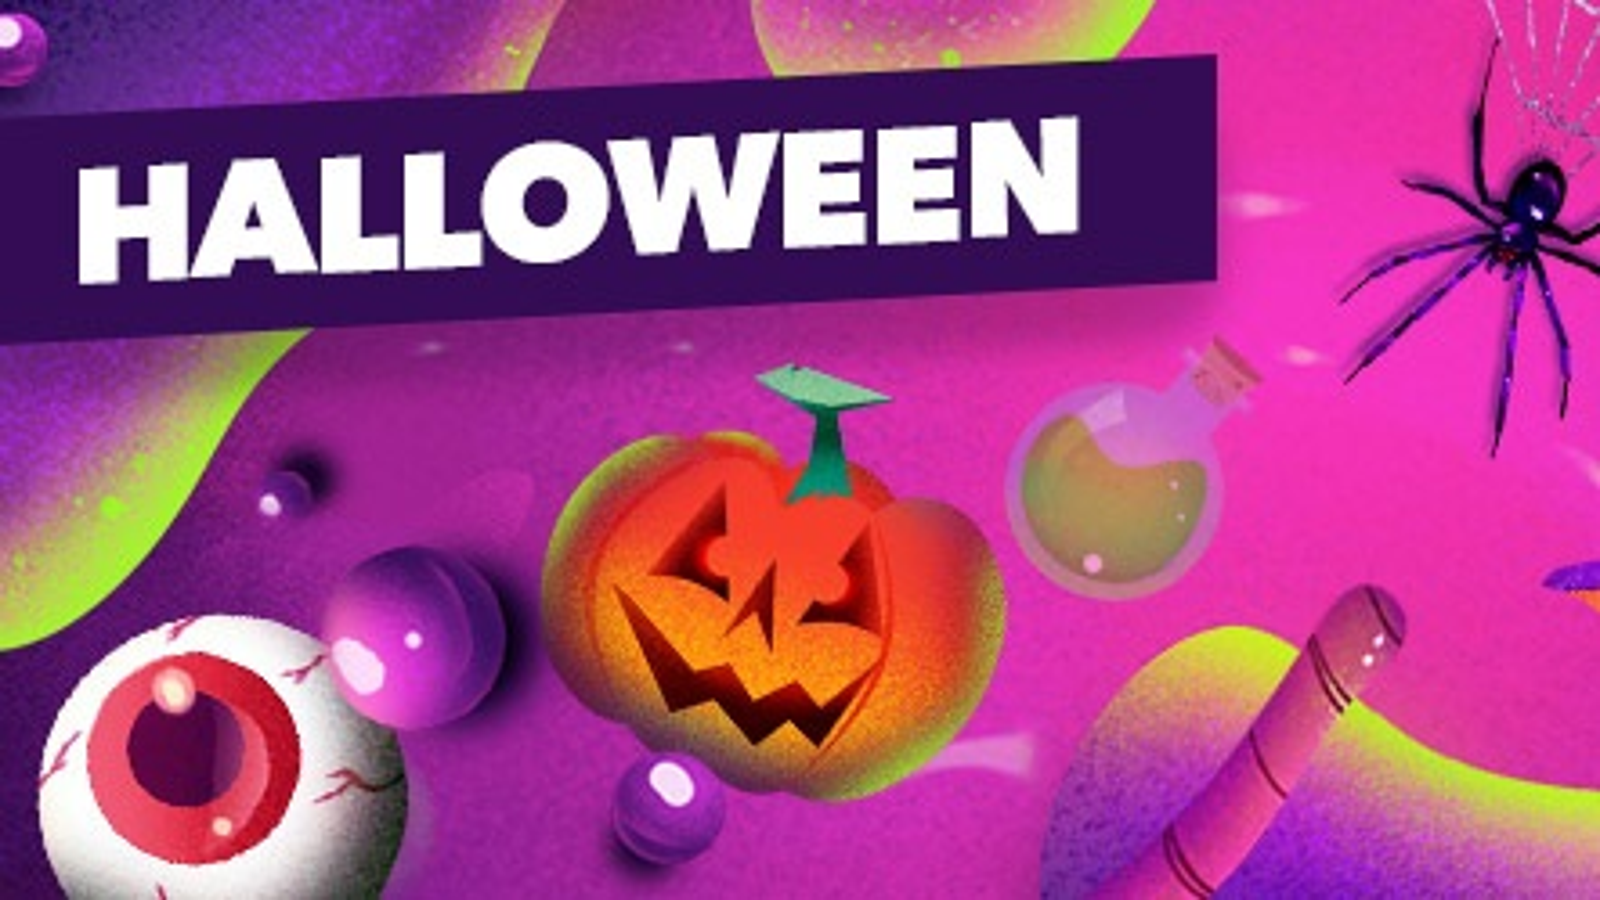 Google has Spooky Savings for Play Store games this Halloween